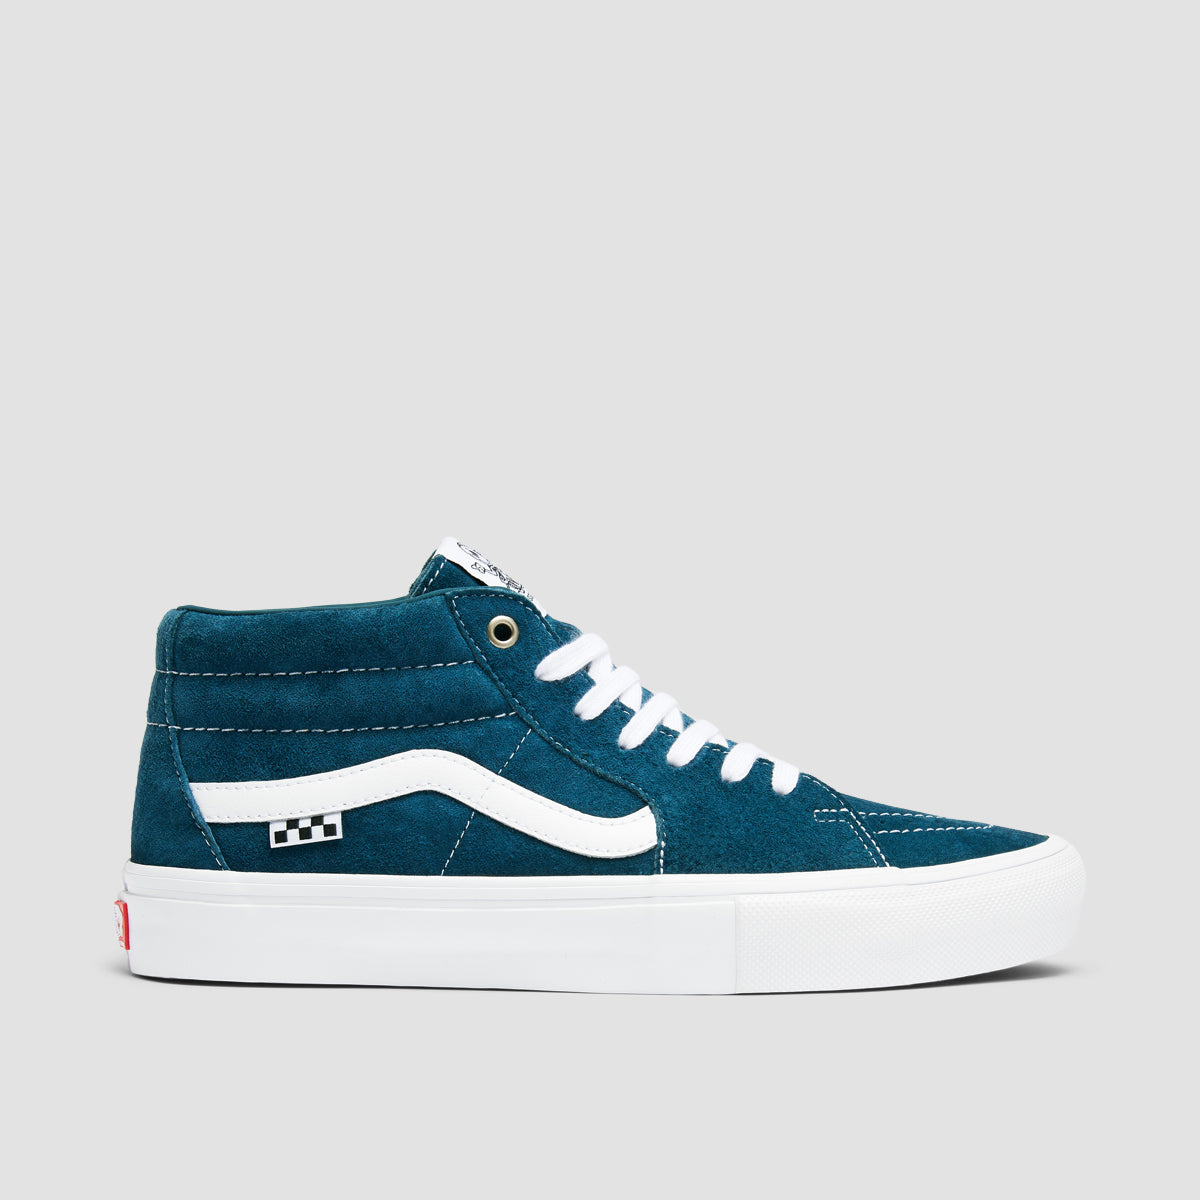 Vans Skate Grosso Mid Top Shoes Pig Suede Blue/White